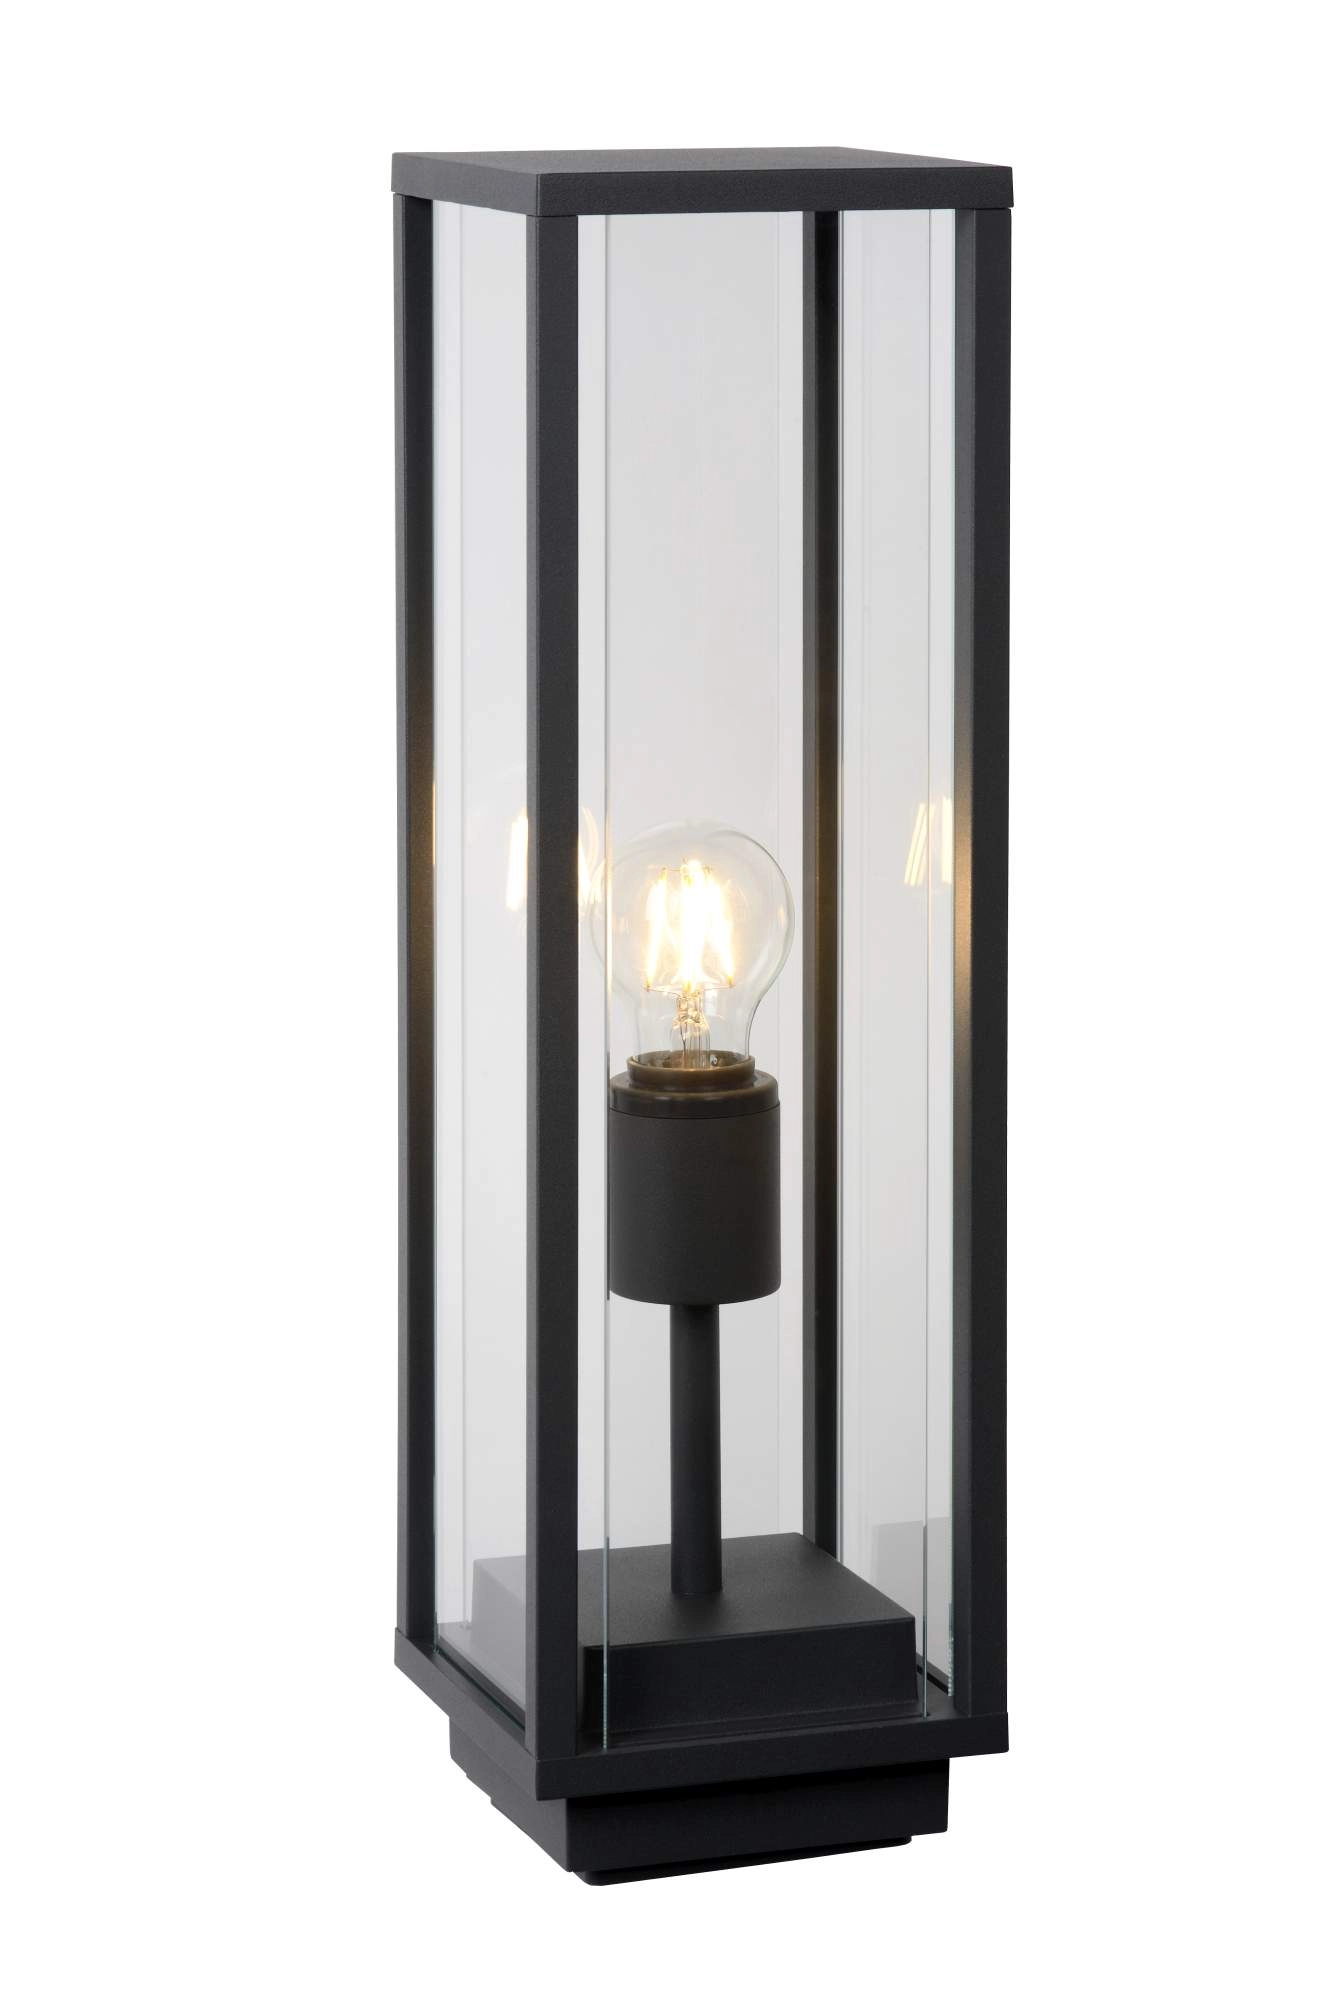 LU 27883/50/30 Lucide CLAIRE - Bollard light Outdoor - 1xE27 - IP54 - Anthracite